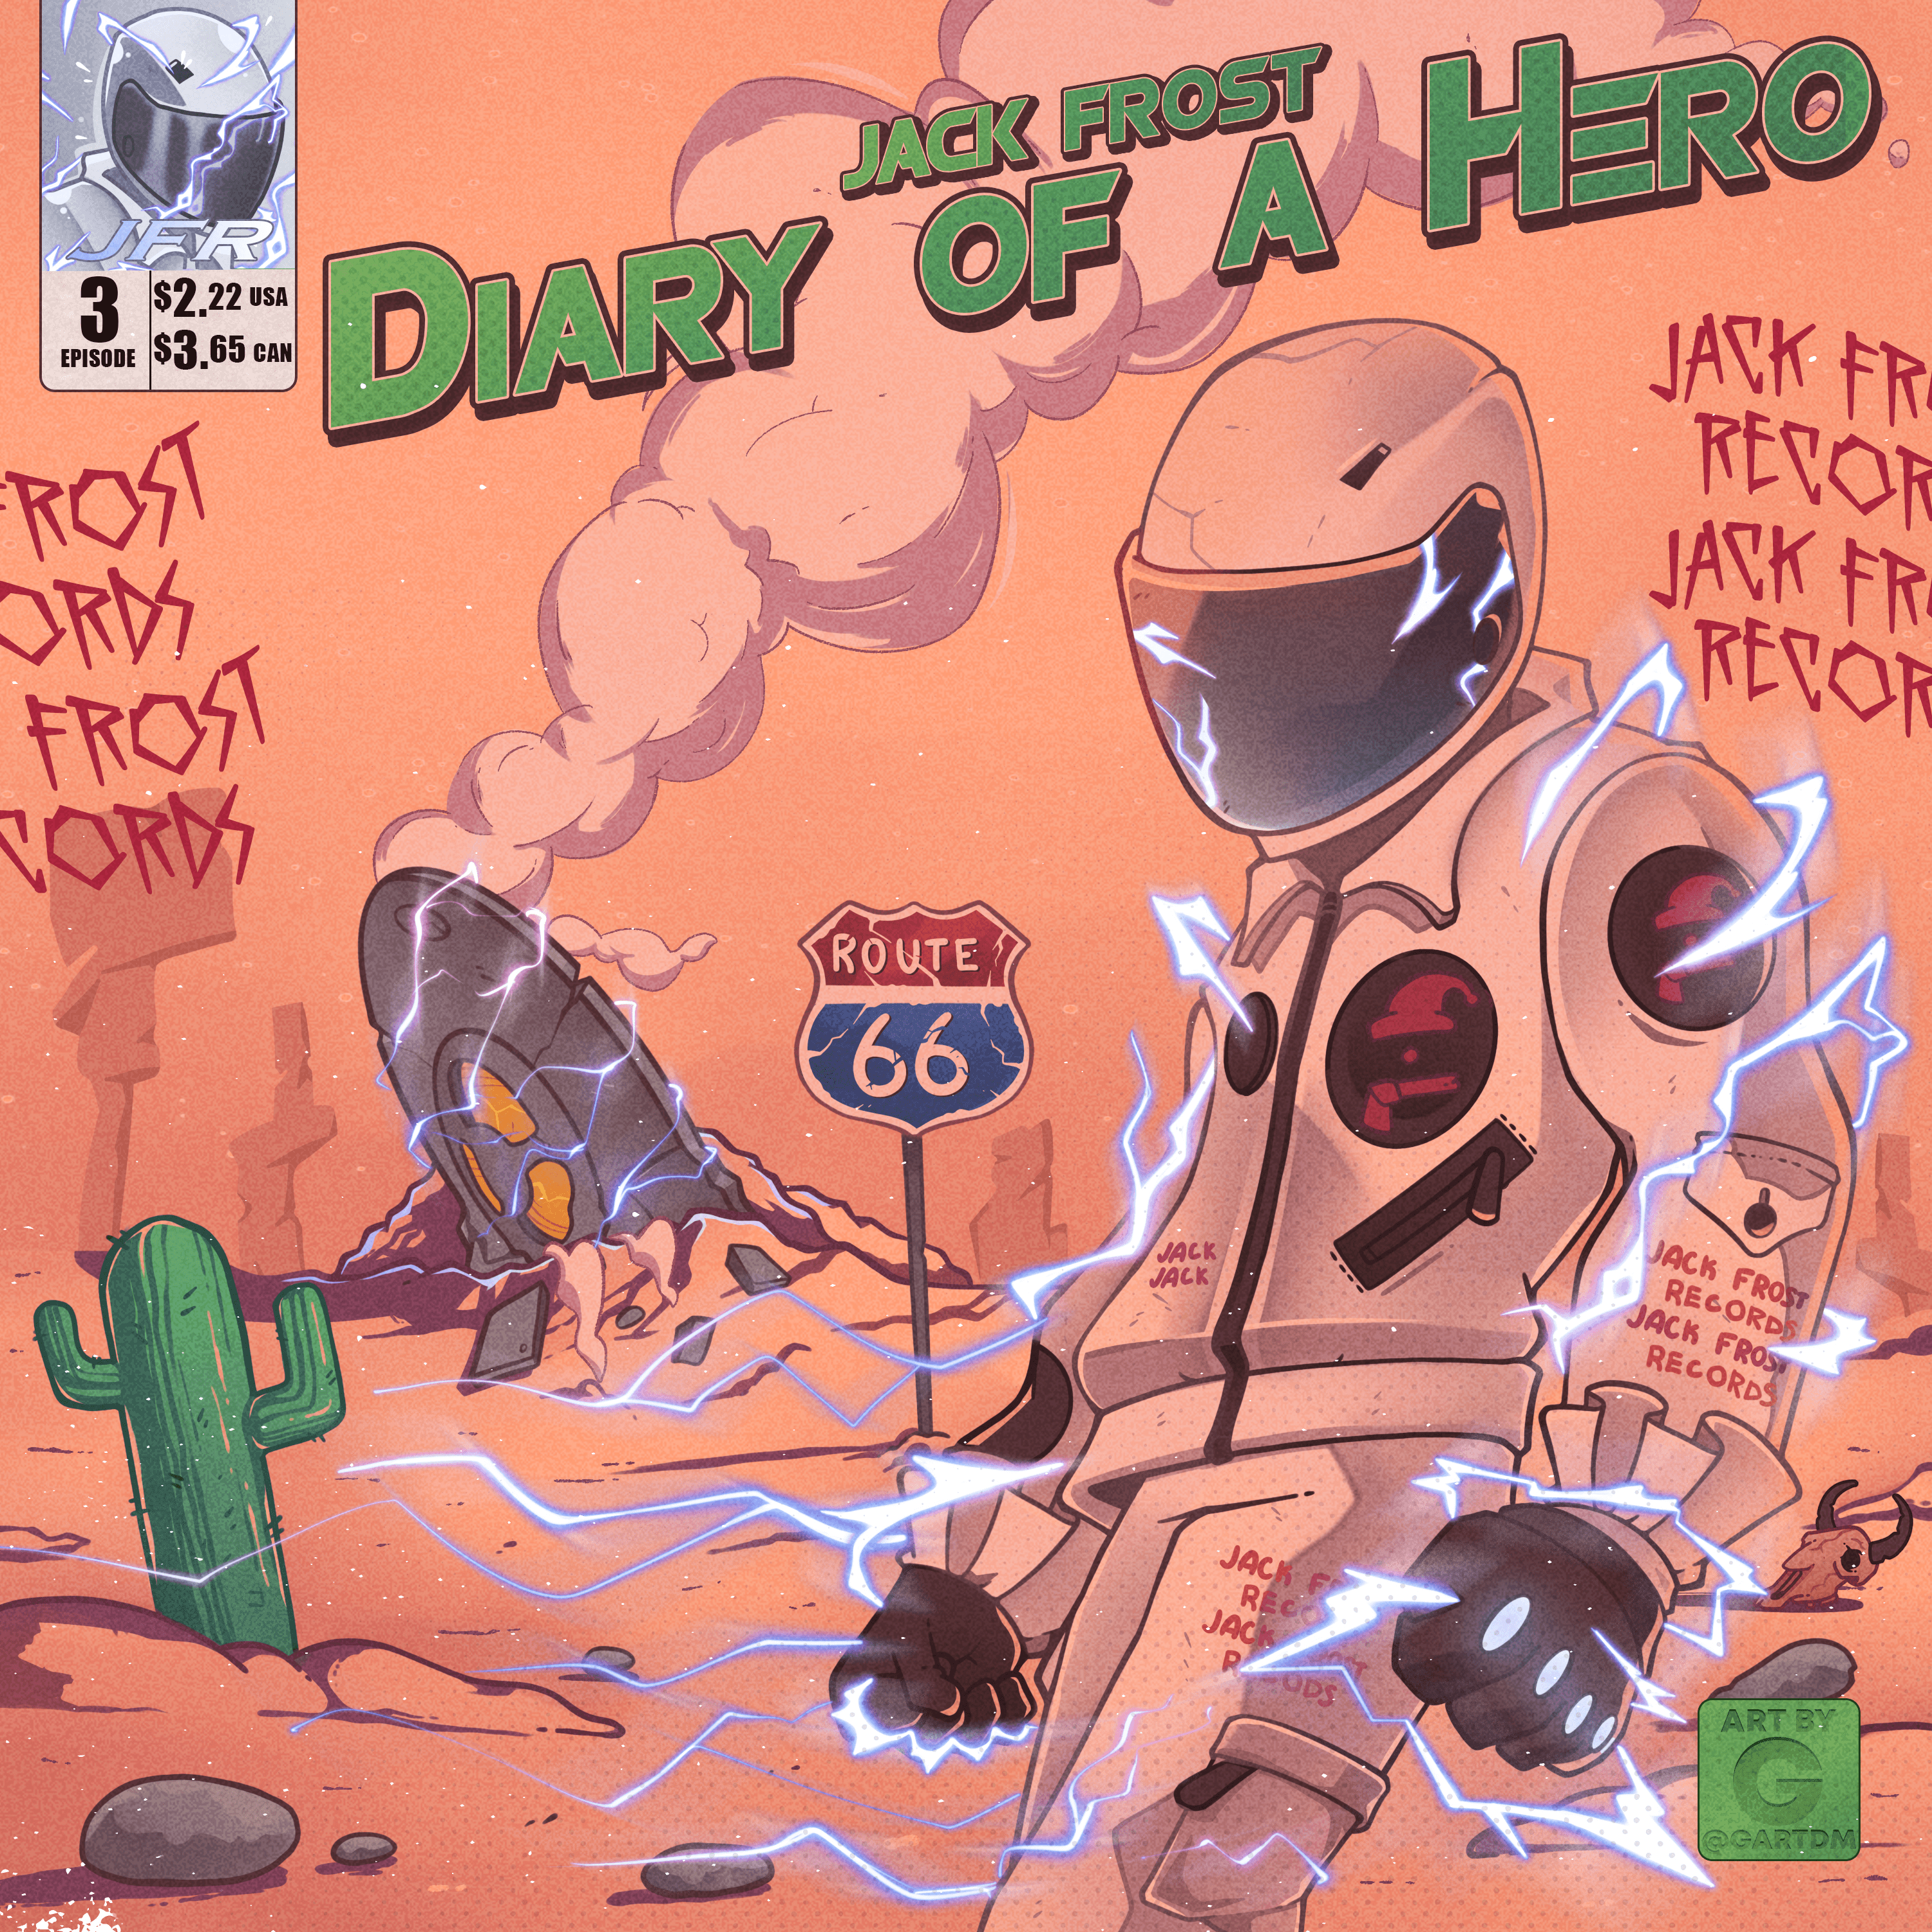 Diary of a Hero by Jack Frost (Episode 3) 196/300